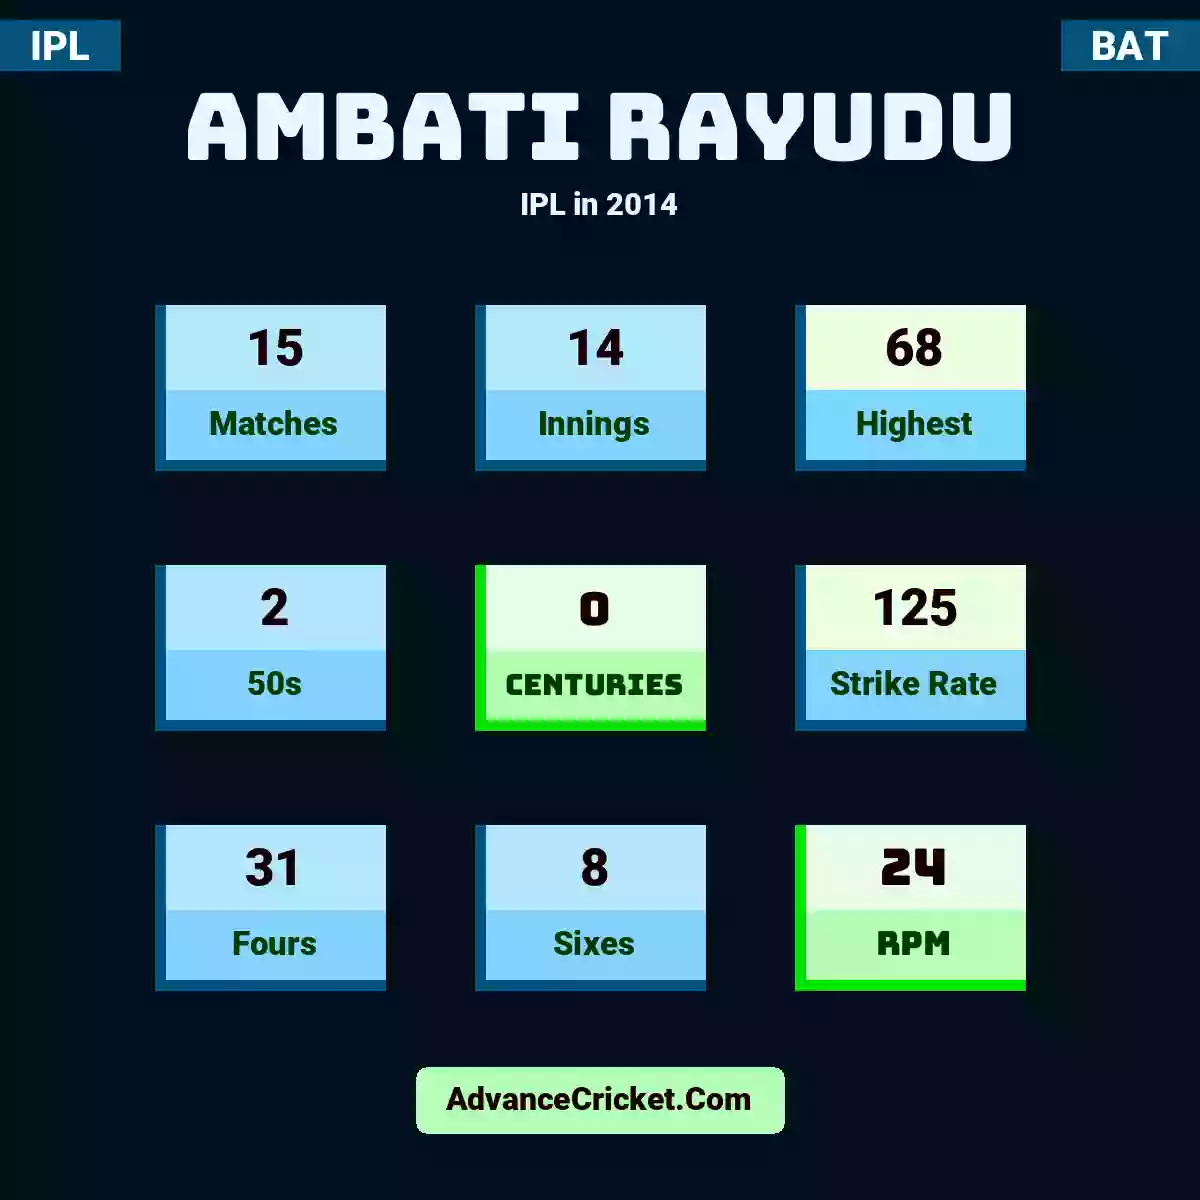 Ambati Rayudu IPL  in 2014, Ambati Rayudu played 15 matches, scored 68 runs as highest, 2 half-centuries, and 0 centuries, with a strike rate of 125. A.Rayudu hit 31 fours and 8 sixes, with an RPM of 24.